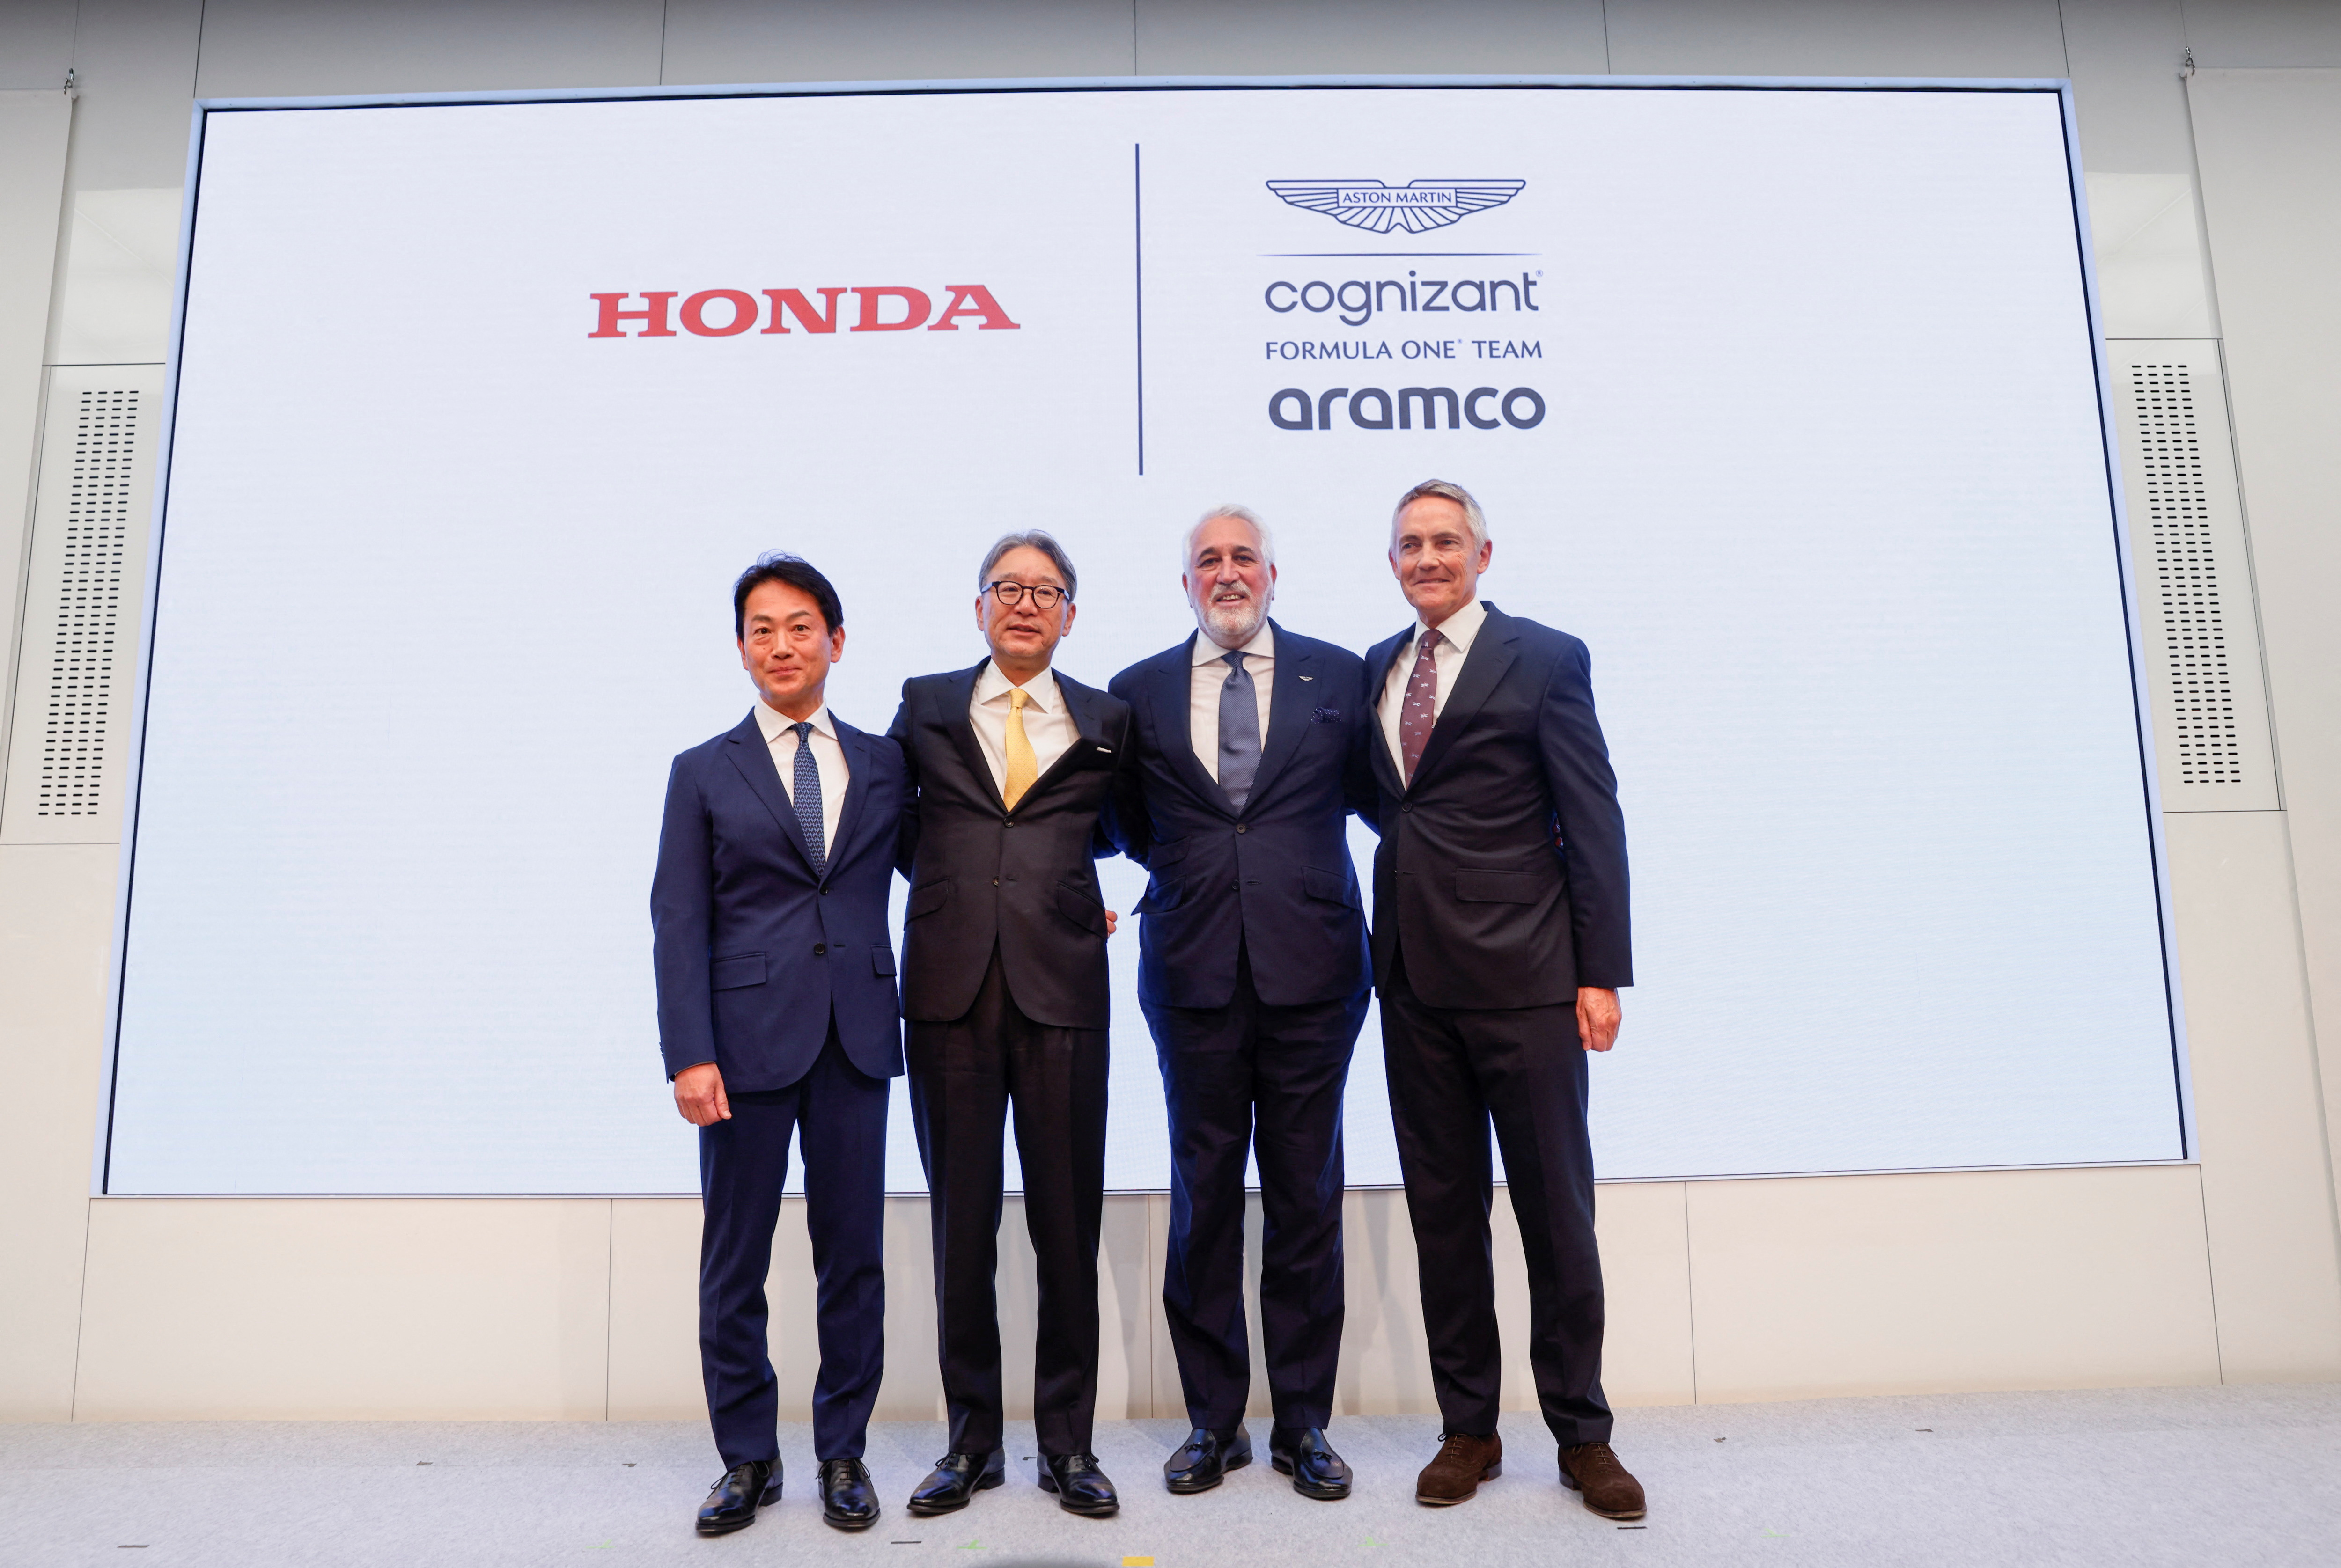 Honda Motor CEO Toshihiro Mibe, Honda Racing Corporation President Koji Watanabe, Aston Martin Aramco Cognizant Formula One Team Chairman Lawrence Stroll, Aston Martin Performance Technologies group CEO Martin Whitmarsh pose for a photograph during a news conference on their auto motorsports activities in Tokyo, Japan May 24, 2023. REUTERS/Issei Kato